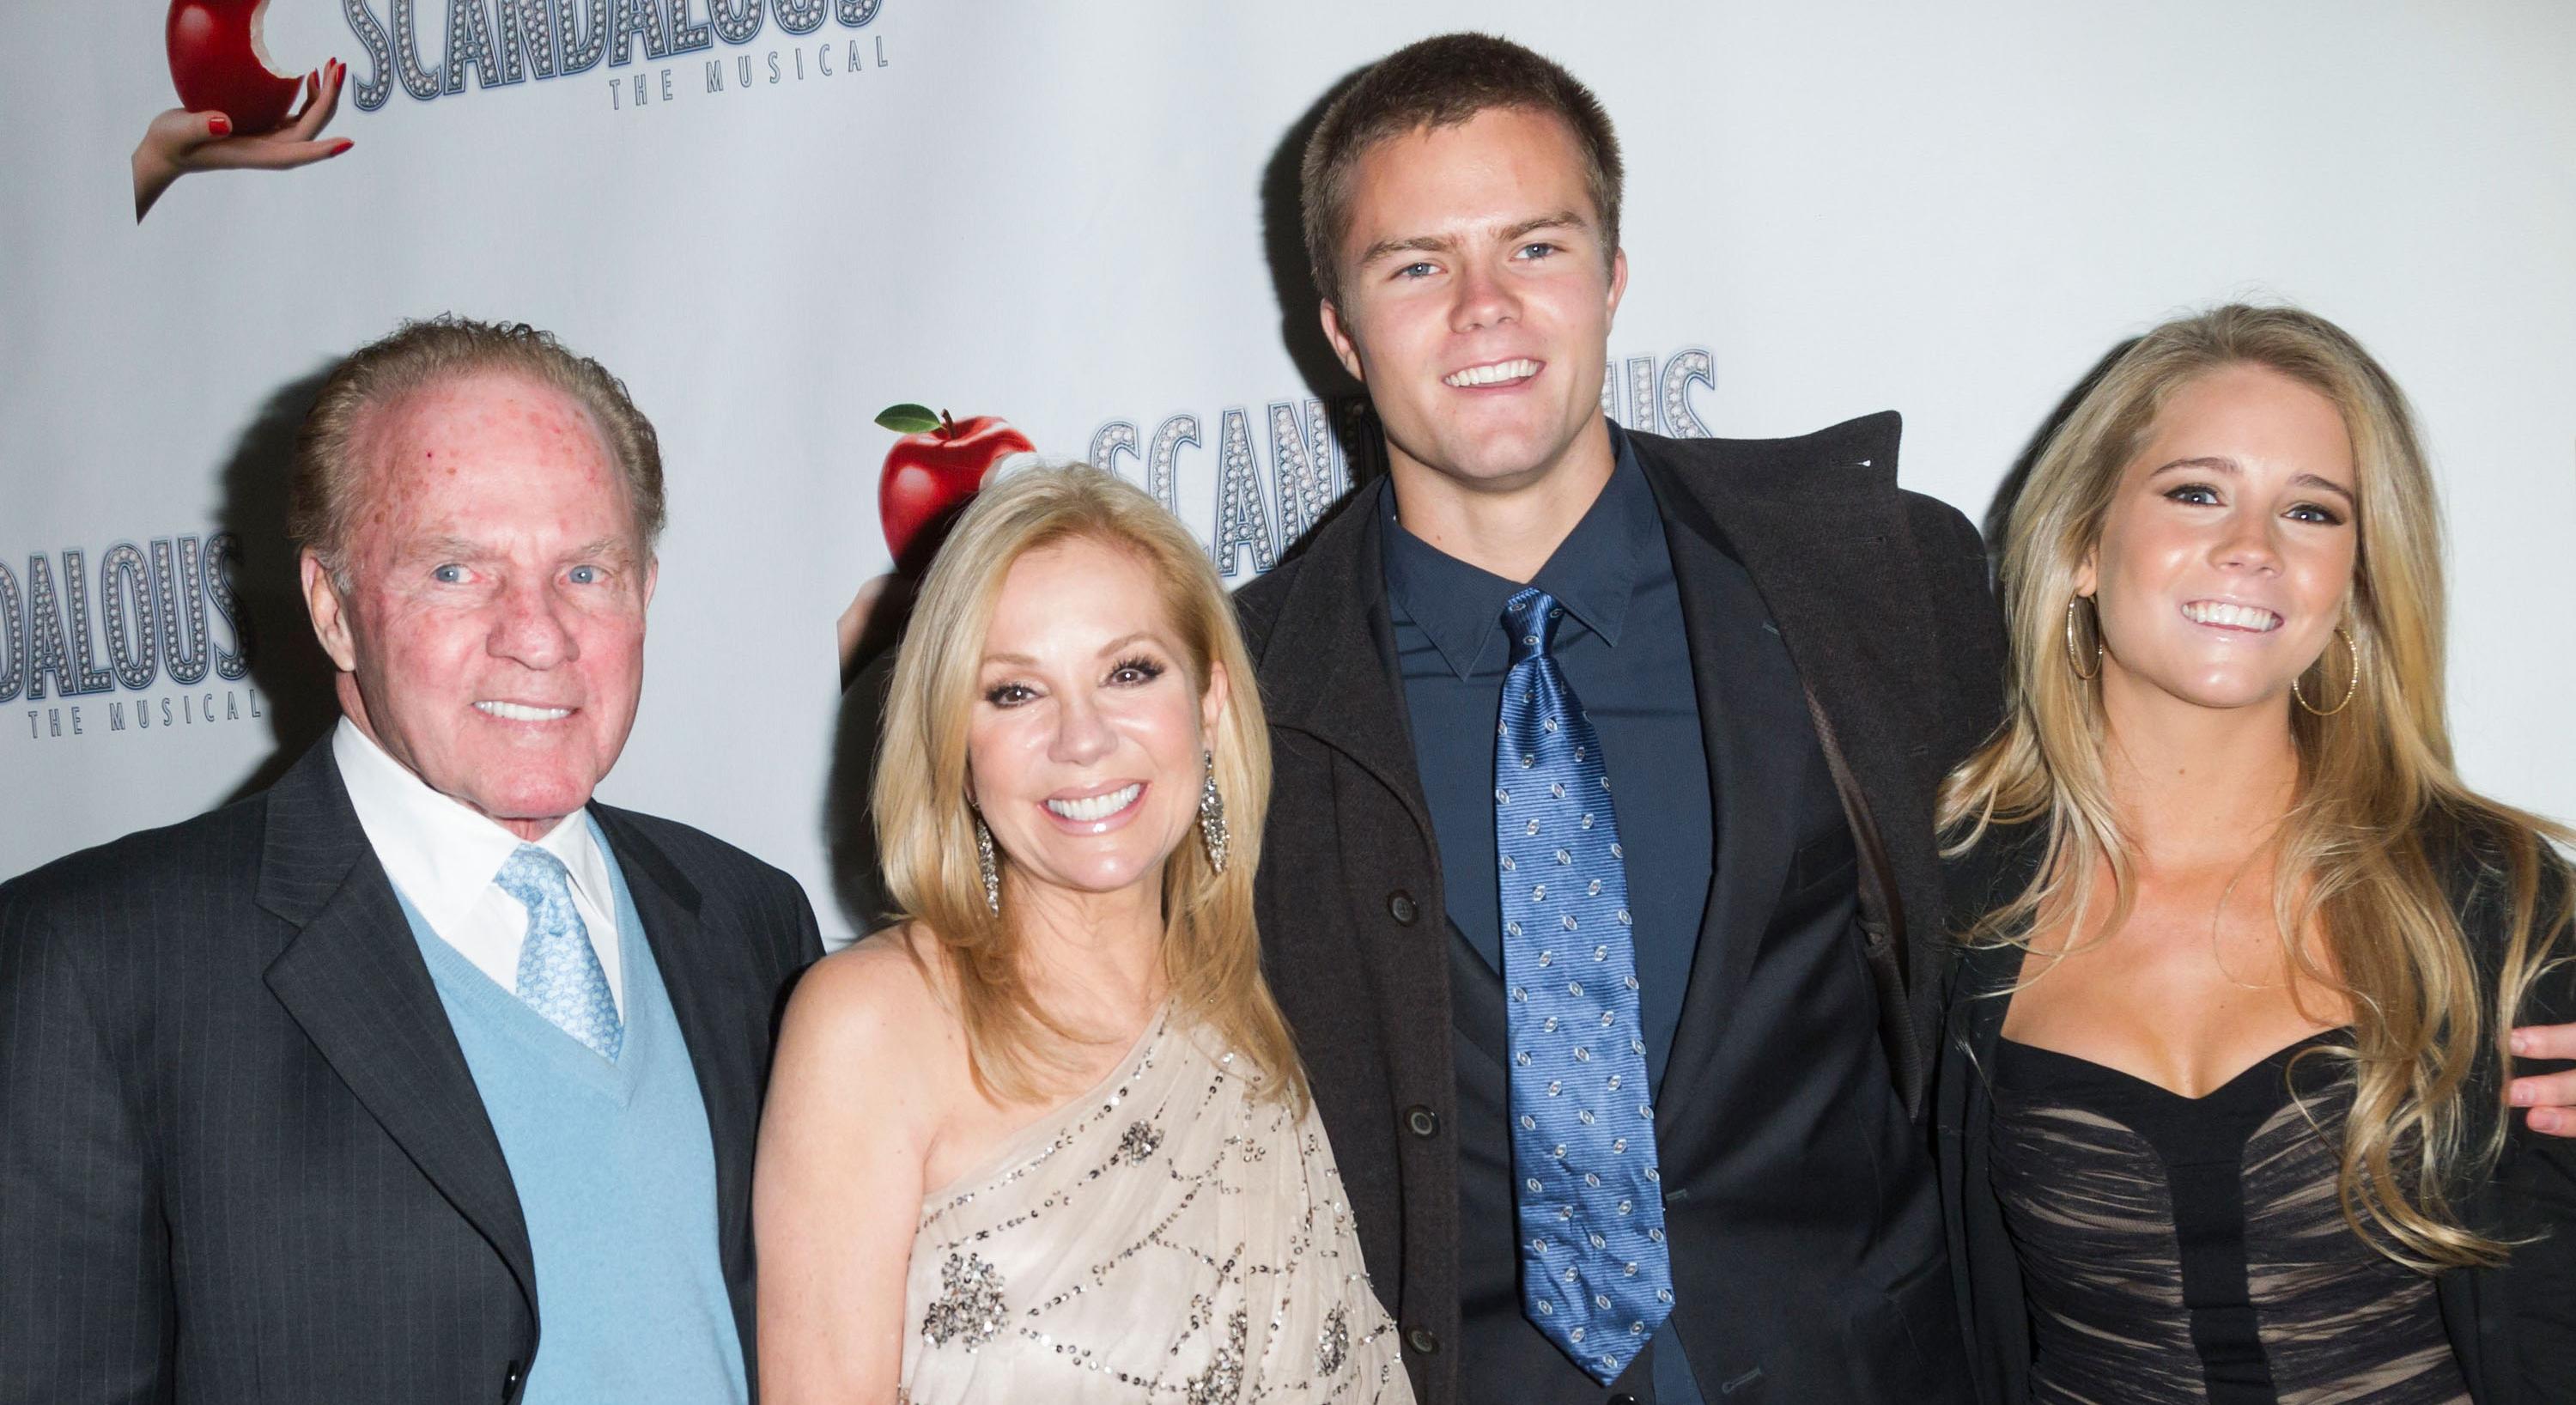 Kathie Lee Gifford, her now-deceased husband Frank Gifford, and her kids.